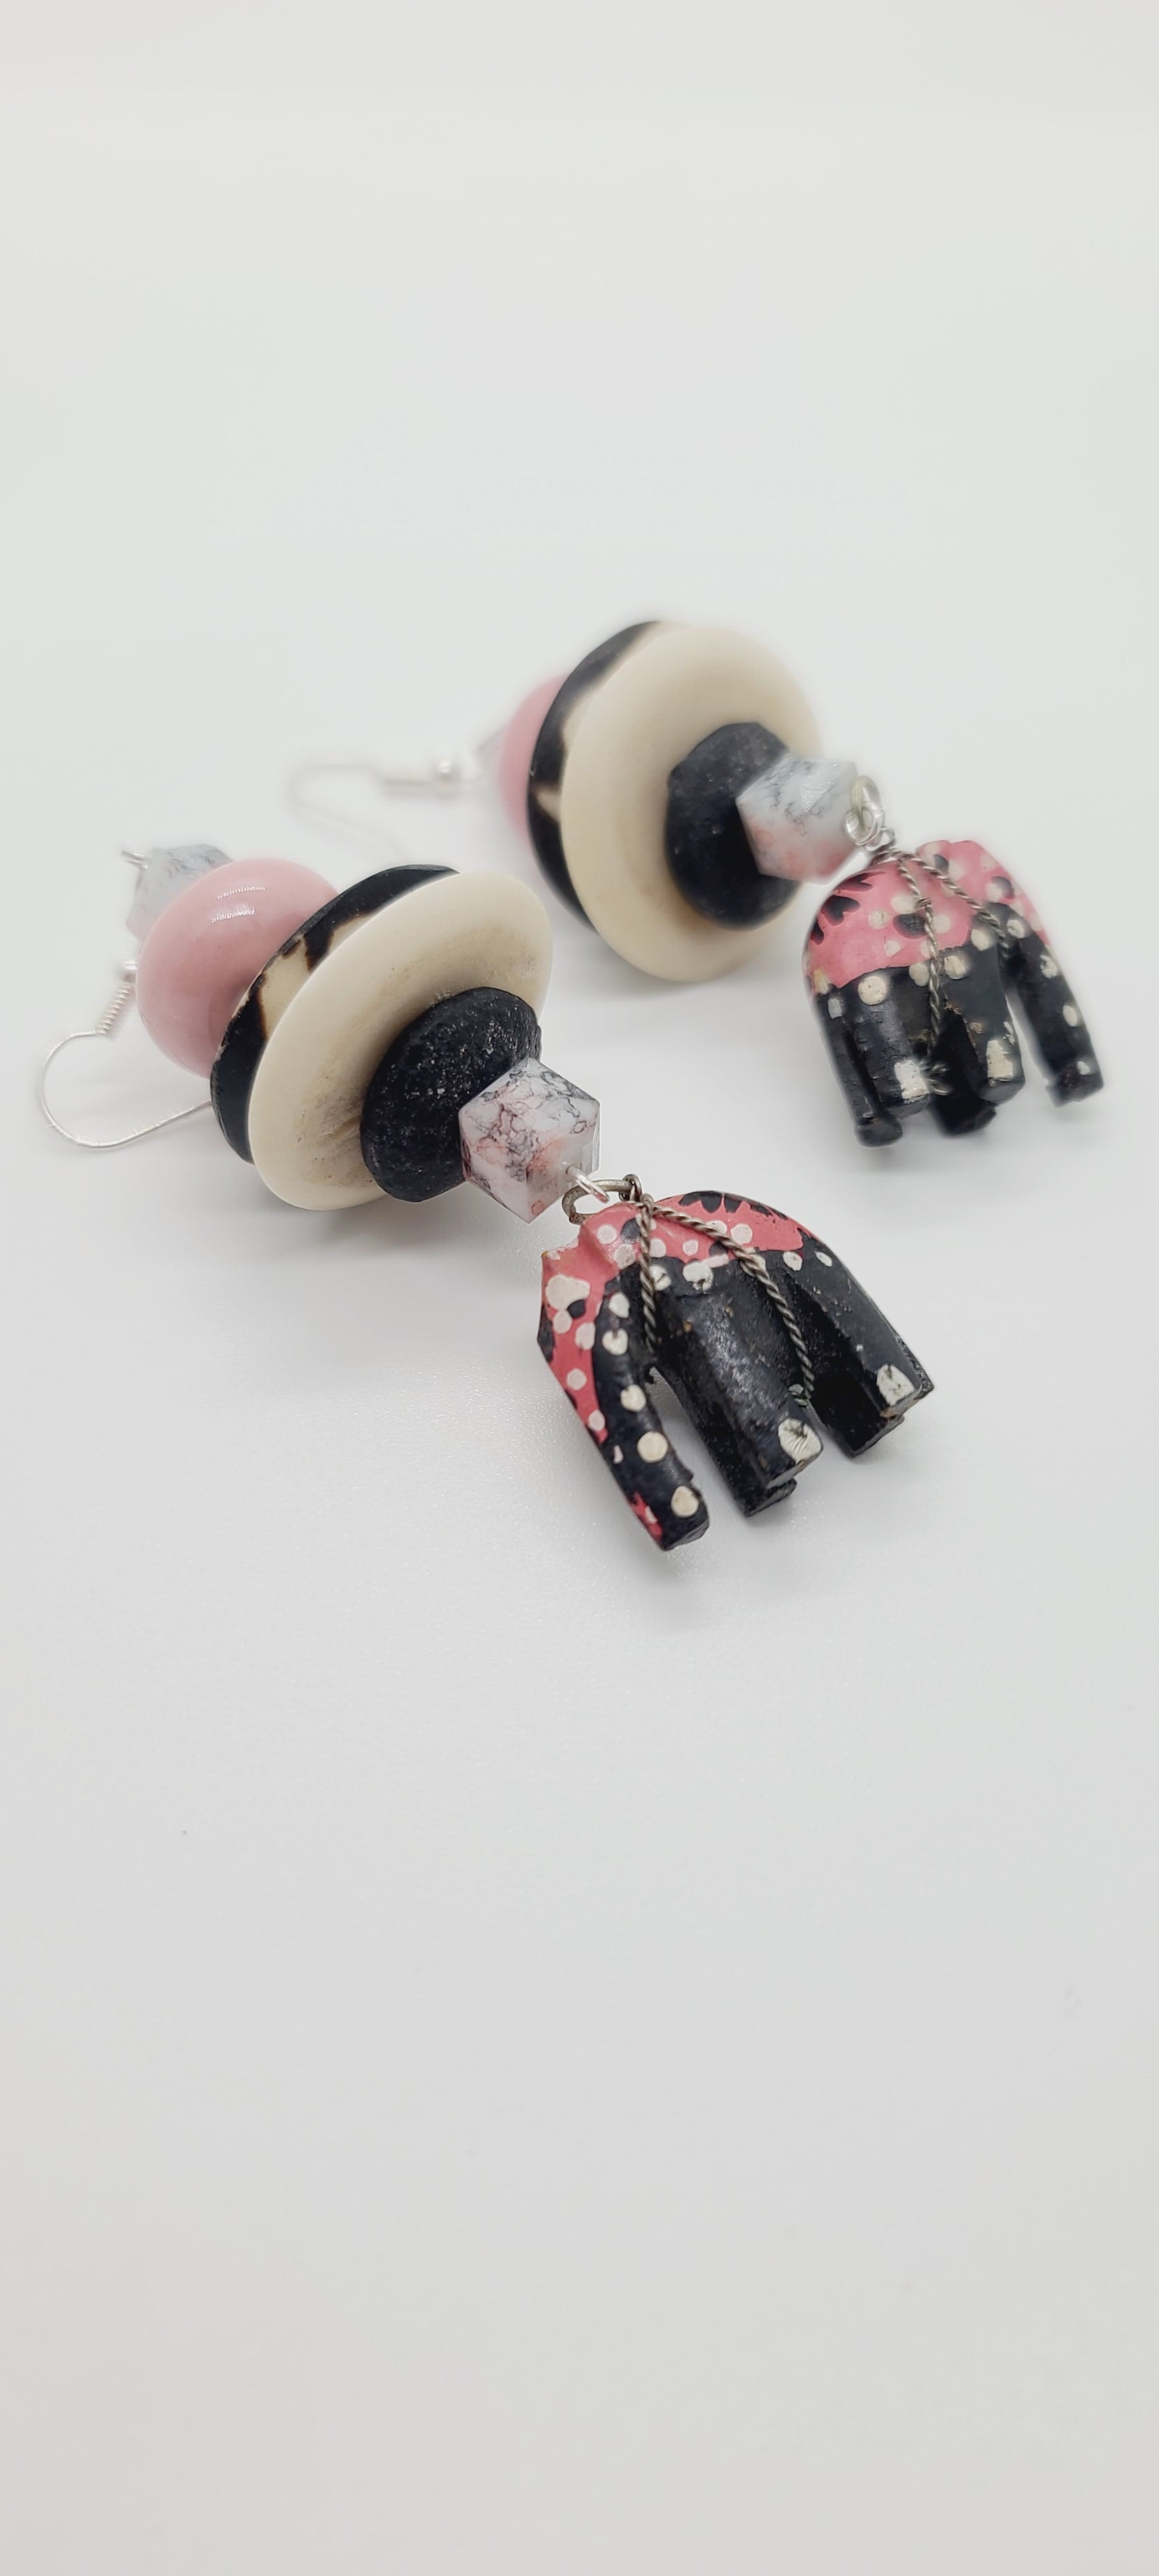 Length: 3.5 inches | Weight: 1 ounce  Distinctly You! These earrings are made with ethnic print wooden hand painted elephants, white Batik bone discs, black Ashanti glass rondelles, pink ceramic rondelles, pink and grey marble crystal cube.